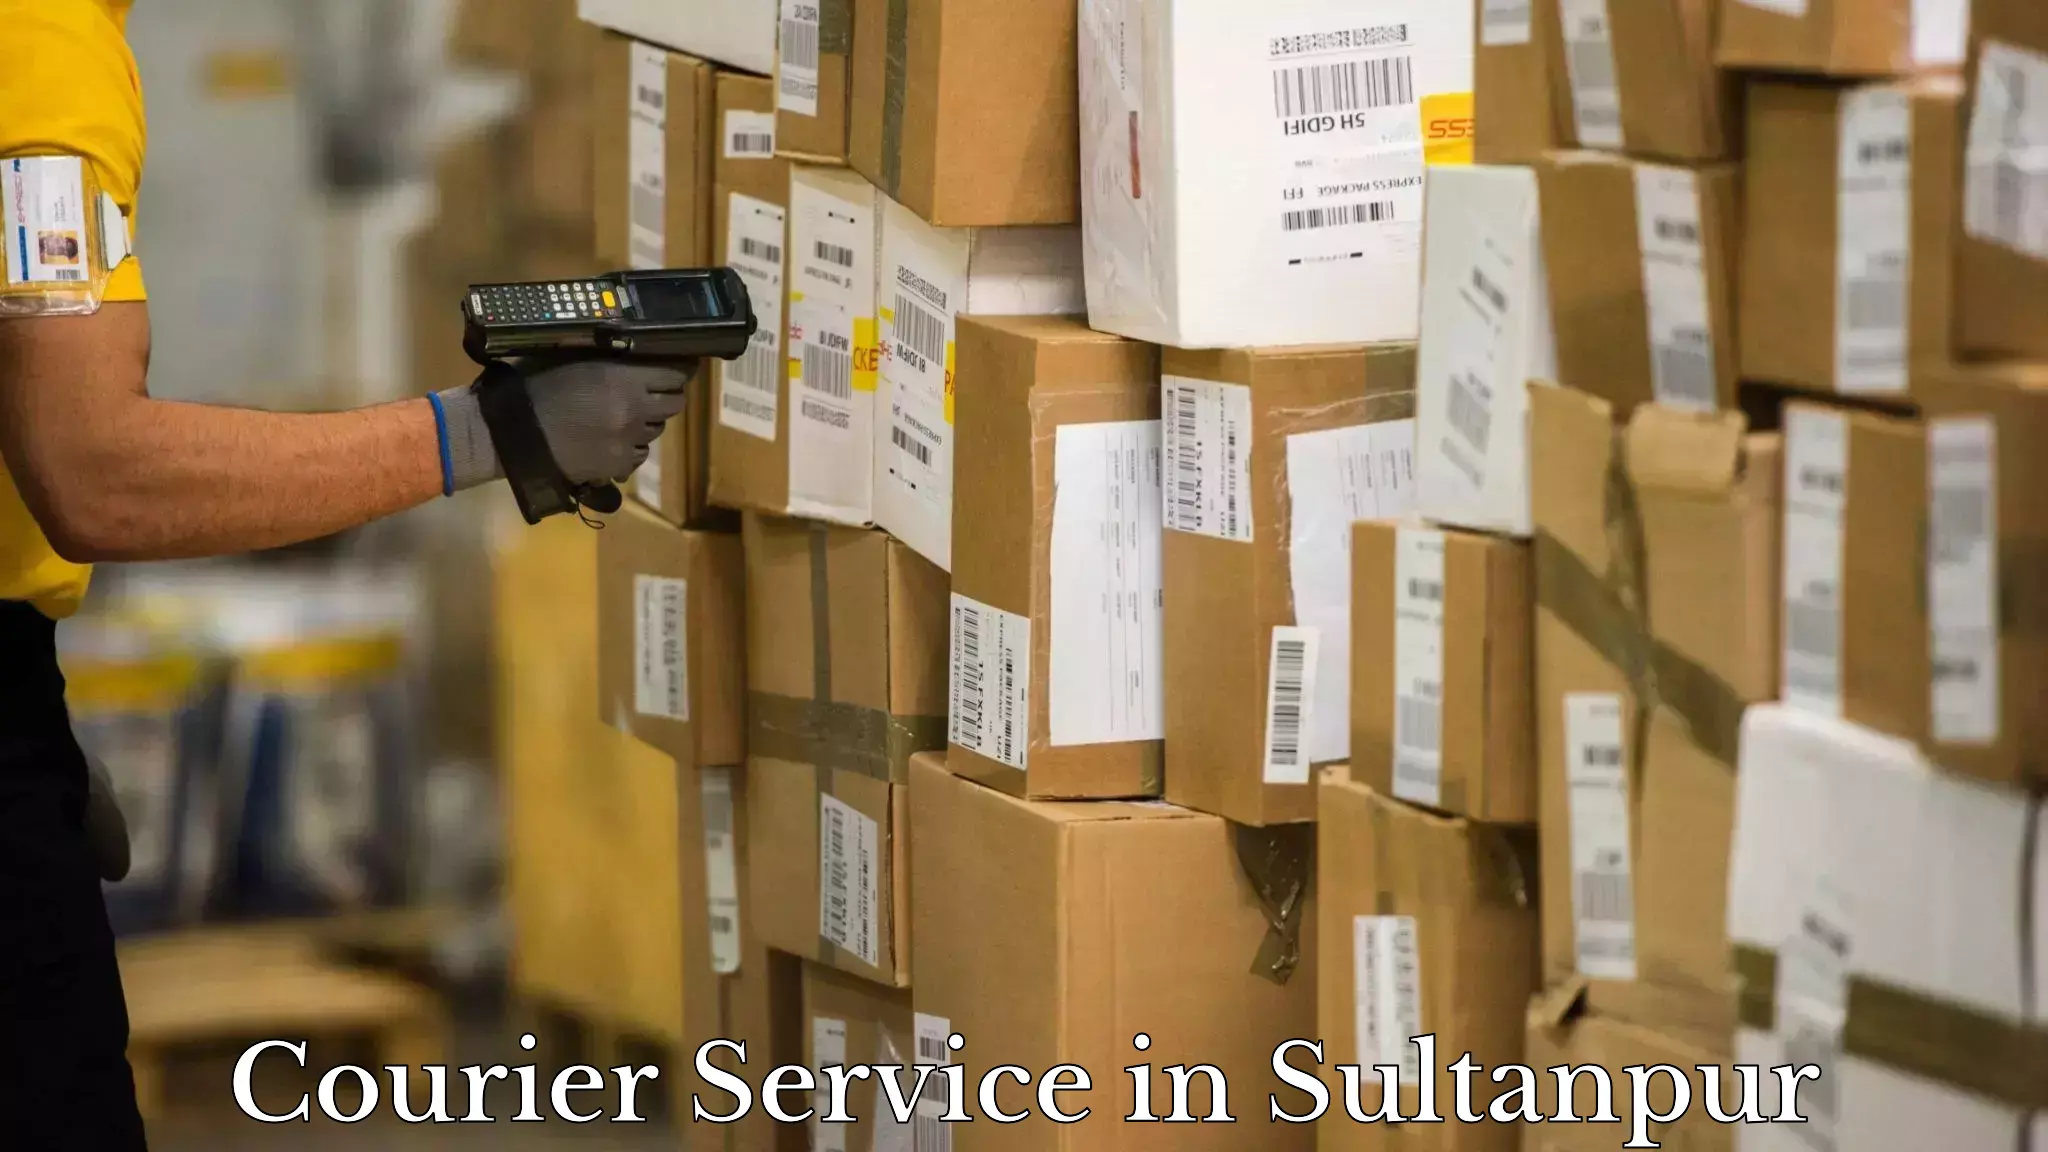 On-demand shipping options in Sultanpur